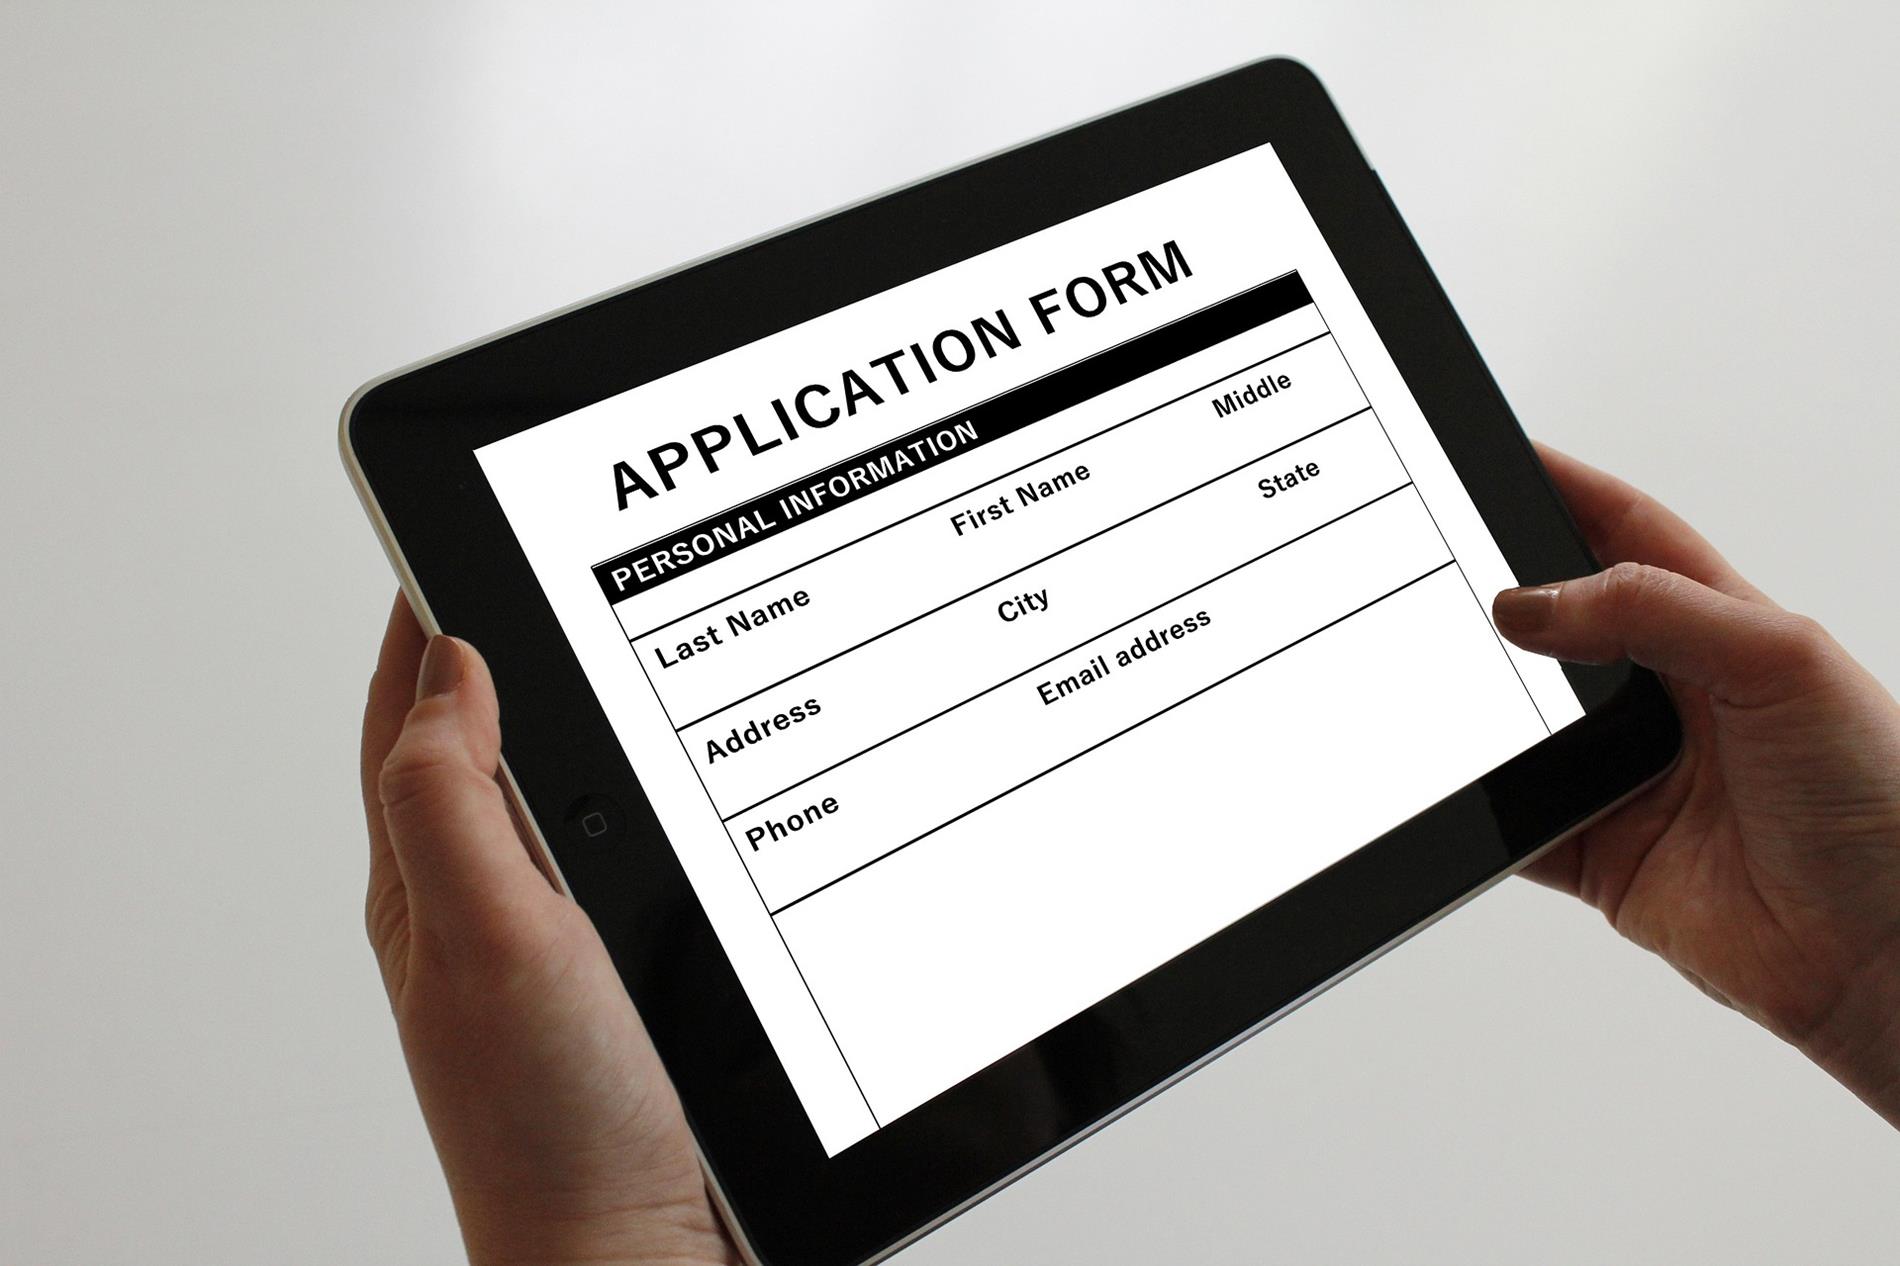 picture of an application form on an iPad